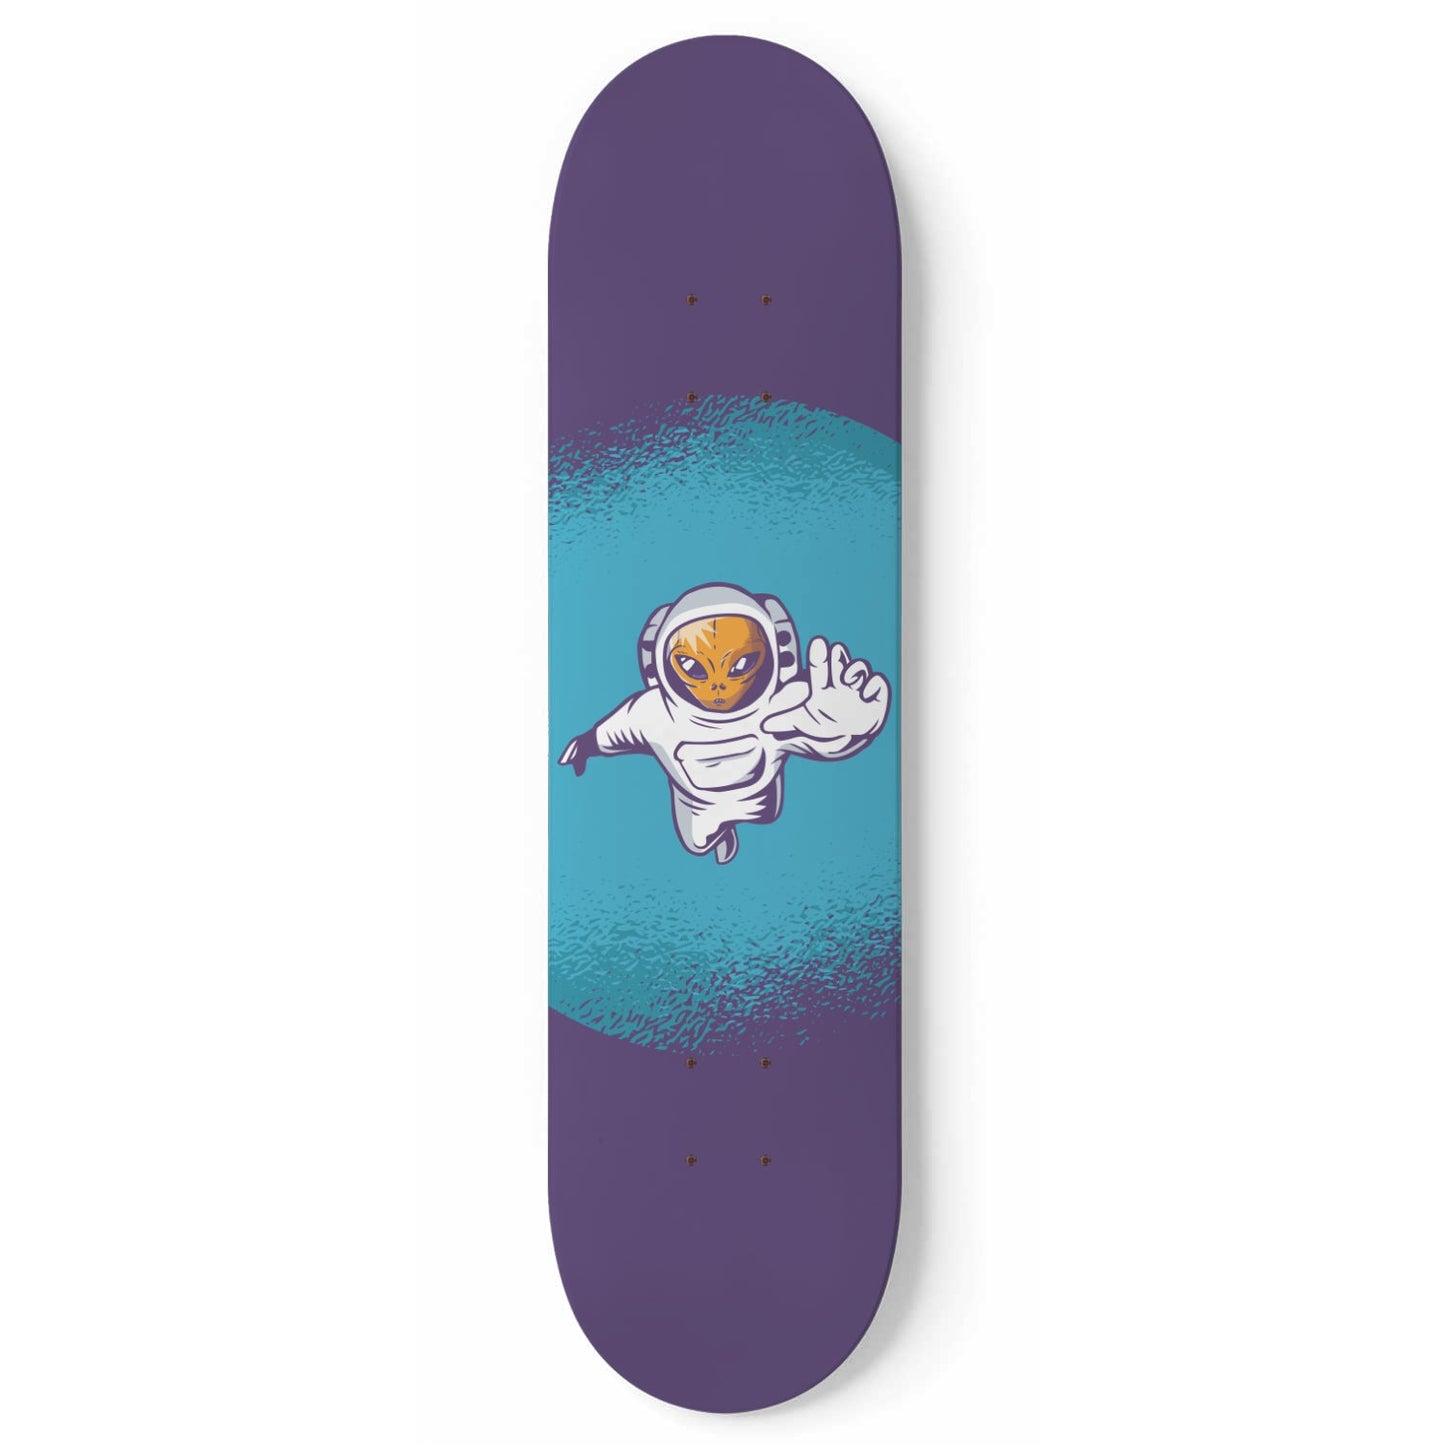 Space Odyssey #9.0.1 - Skater Wall